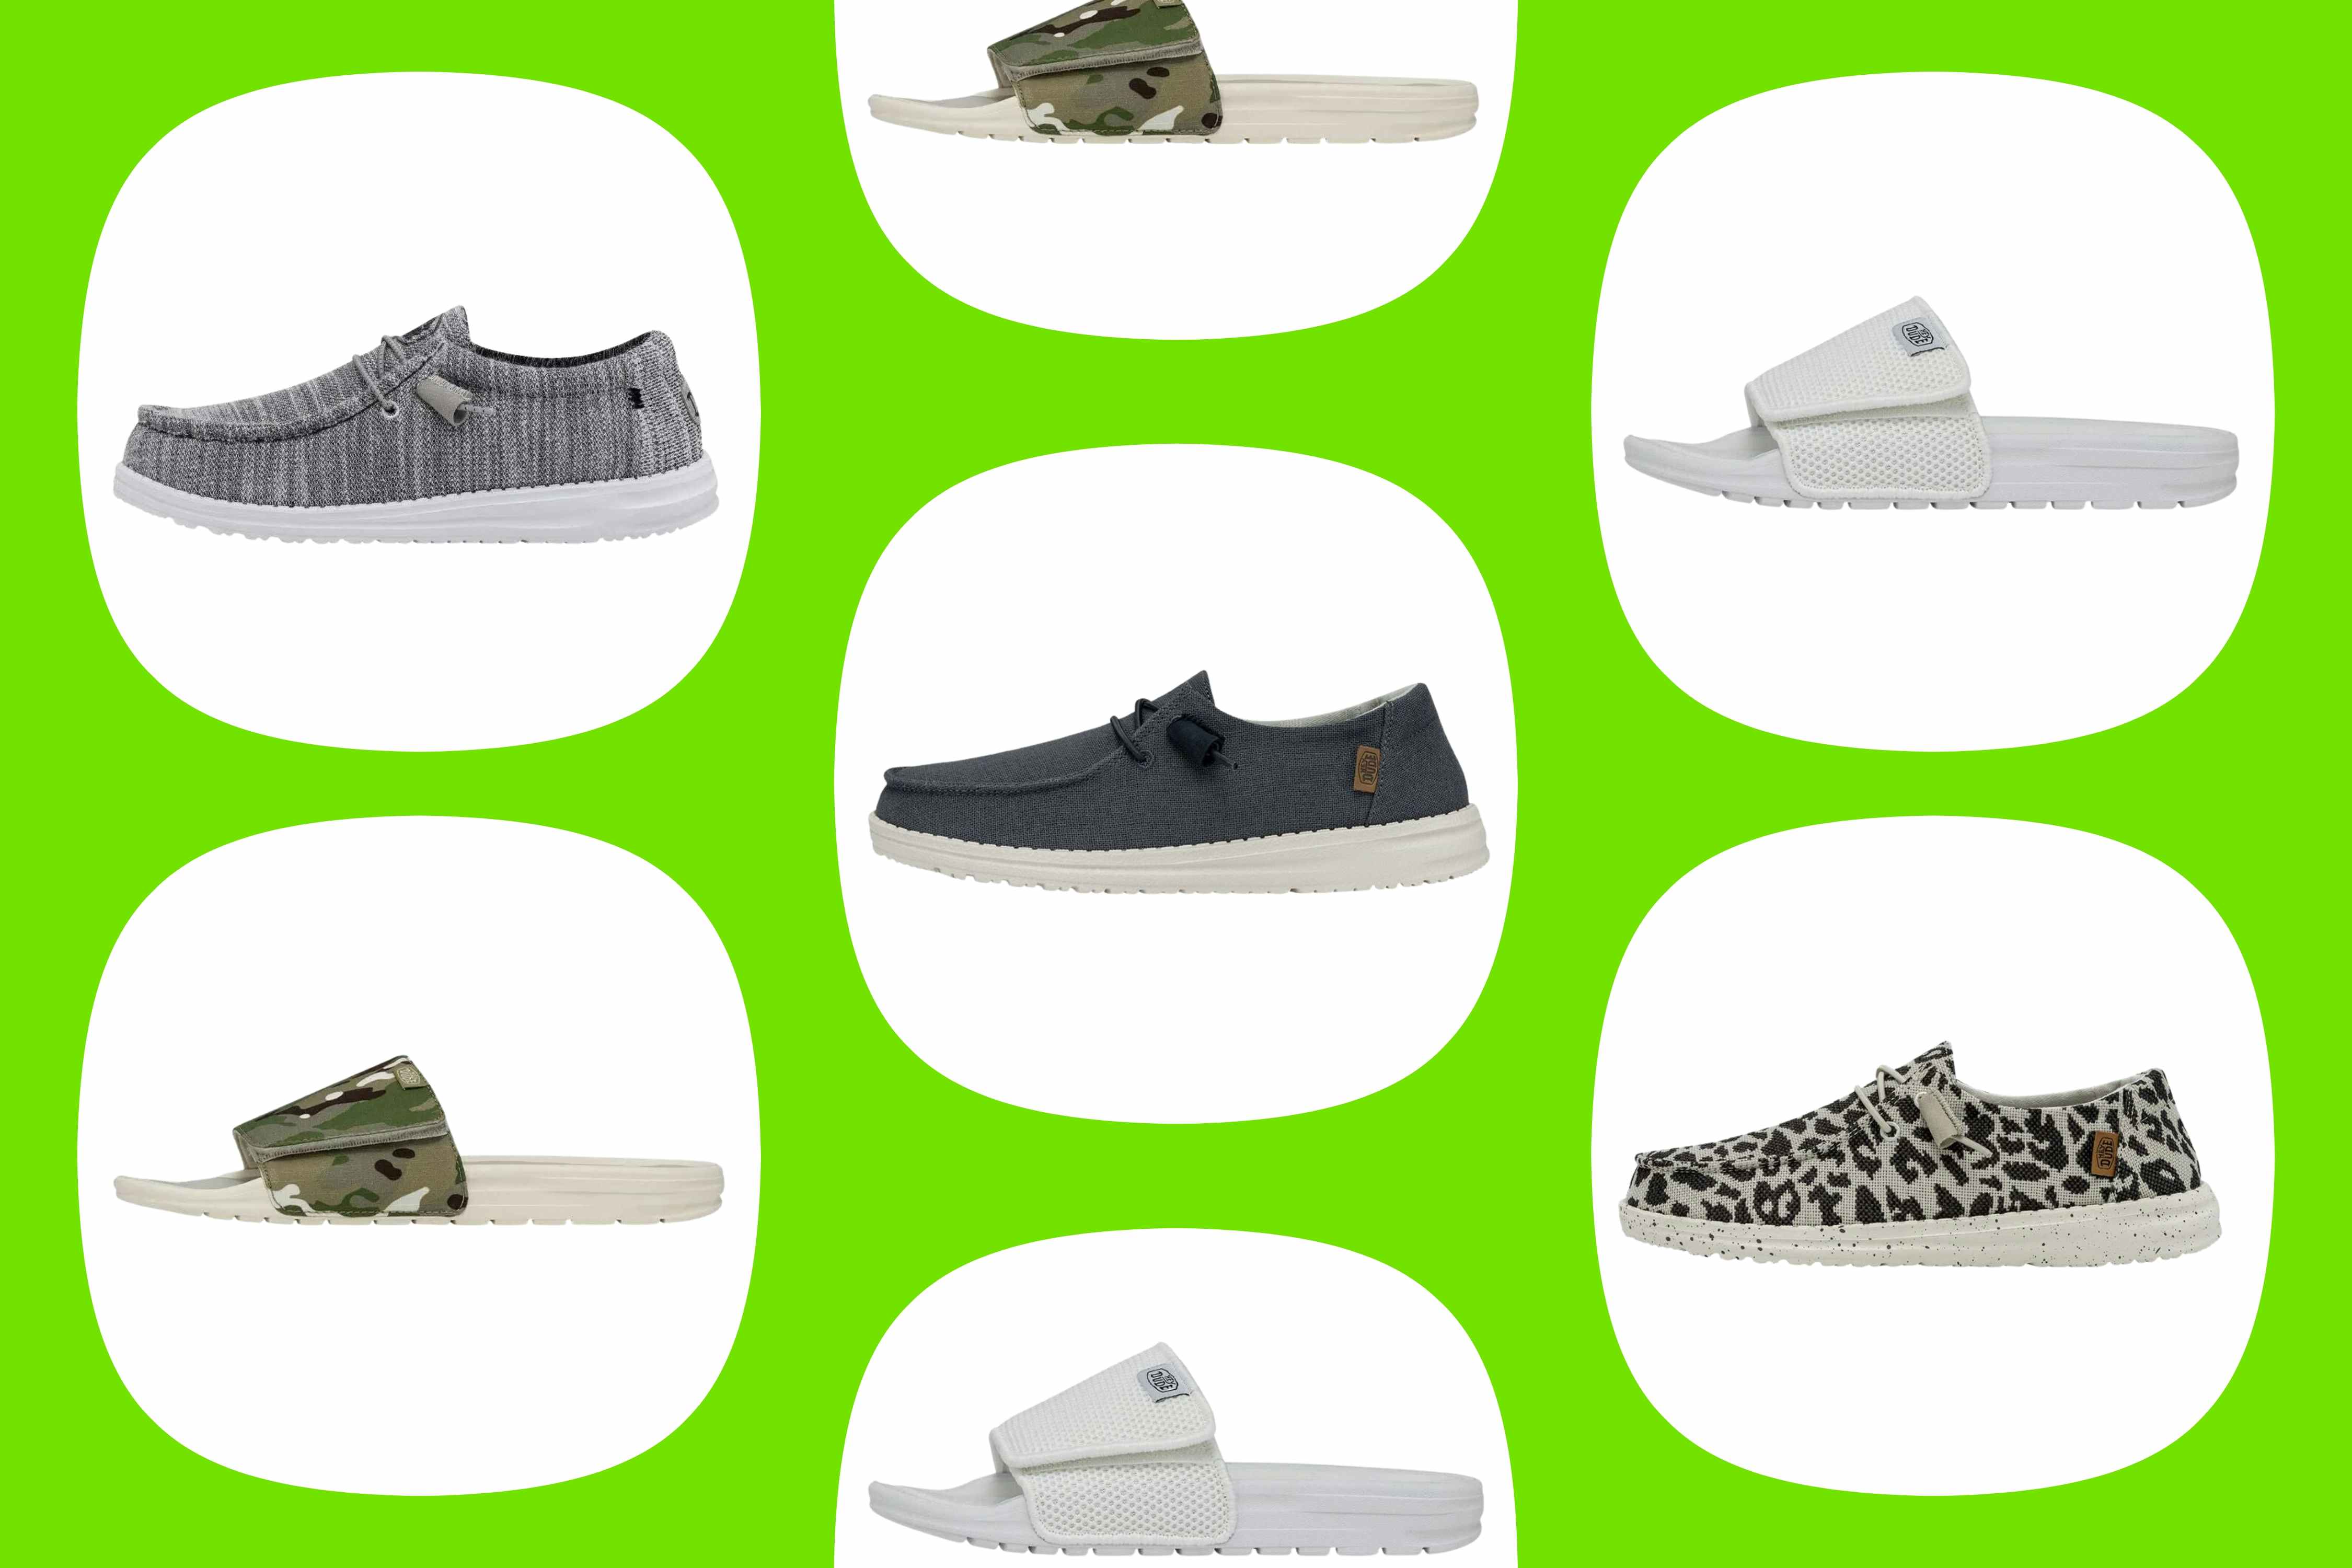 Hey Dude Shoe Sale at eBay — Prices Starting at Just $19 Shipped